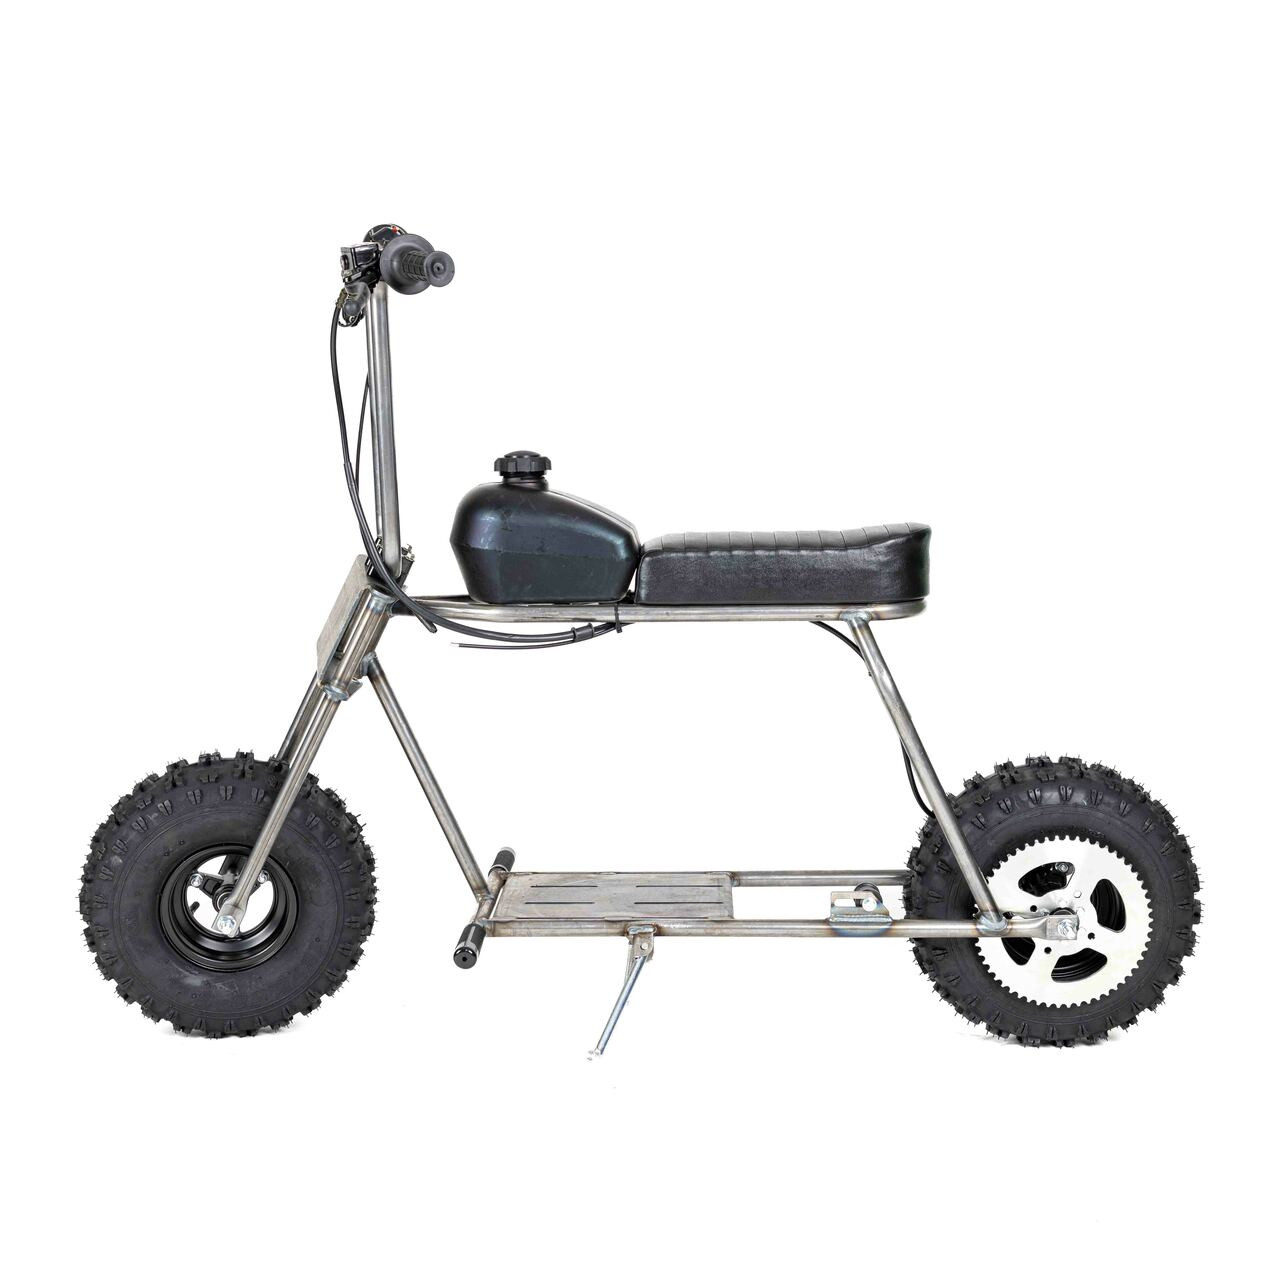 Rascal Minibike Roller Kit (RASCALROLLERKIT) with 15" Cleats and Rigid Fork